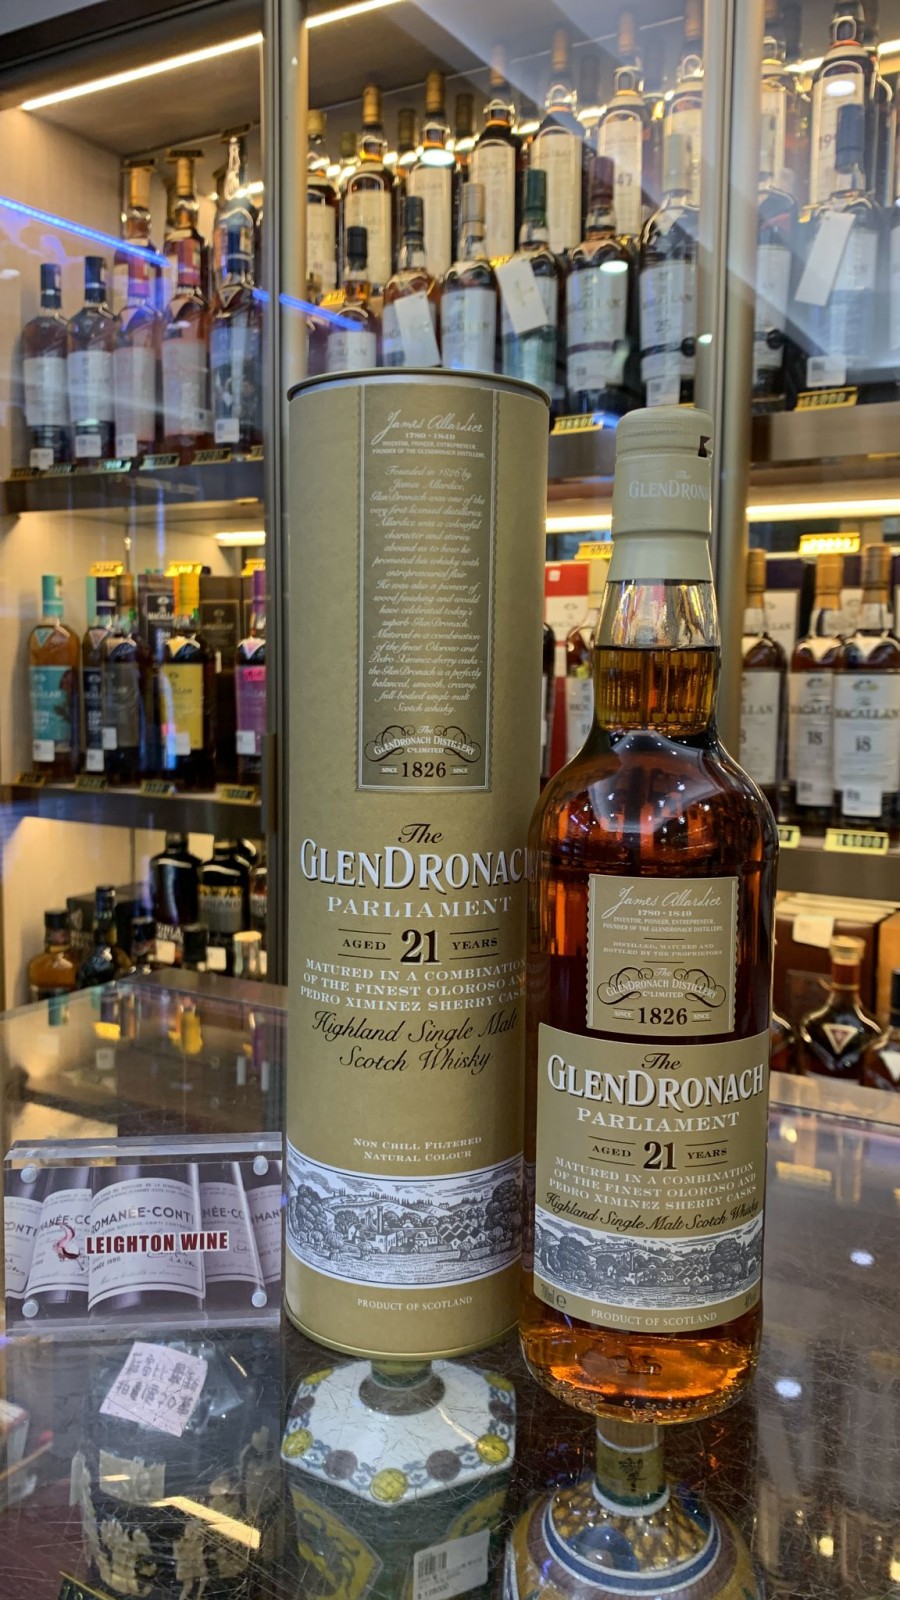 GlenDronach Parliament Aged 21 Years